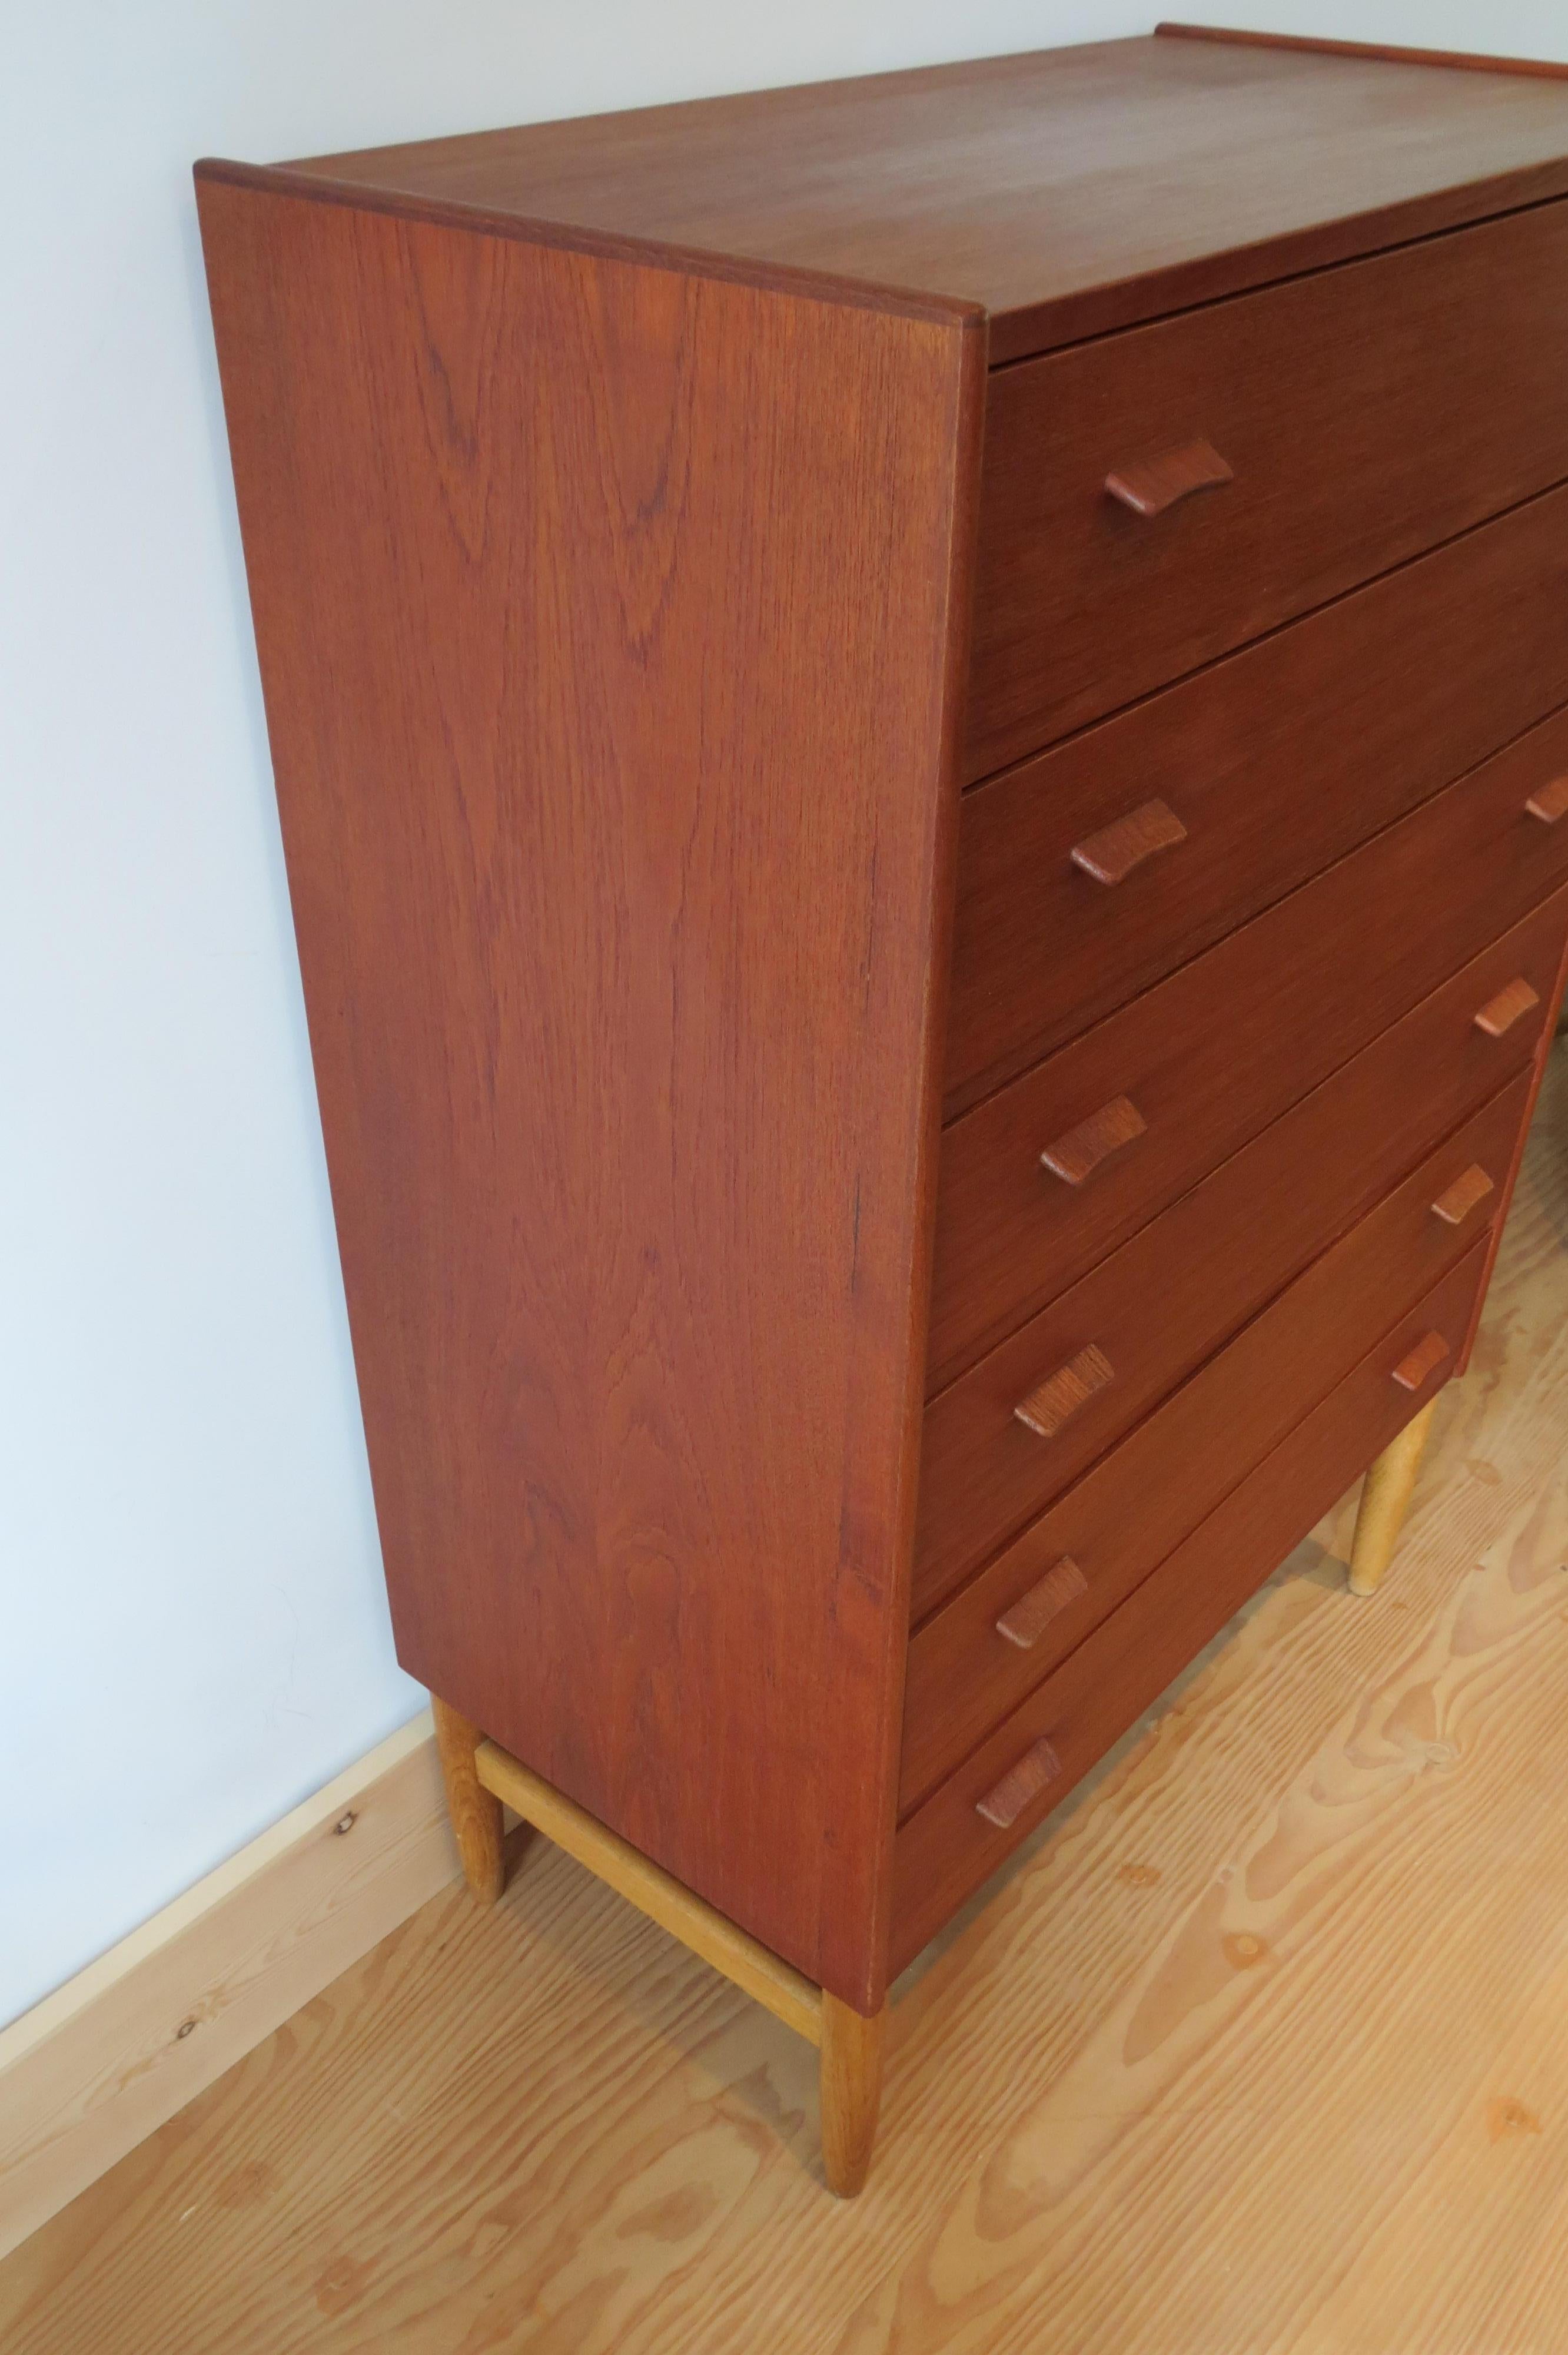 Fabulous Teak chest of drawers designed by Poul Volther and manufactured by Munch Slageise, Denmark.
The sides, top and drawer fronts of the cabinet are made from Teak veneer.  It has a solid Oak base and legs, solid Teak handles and solid Beech